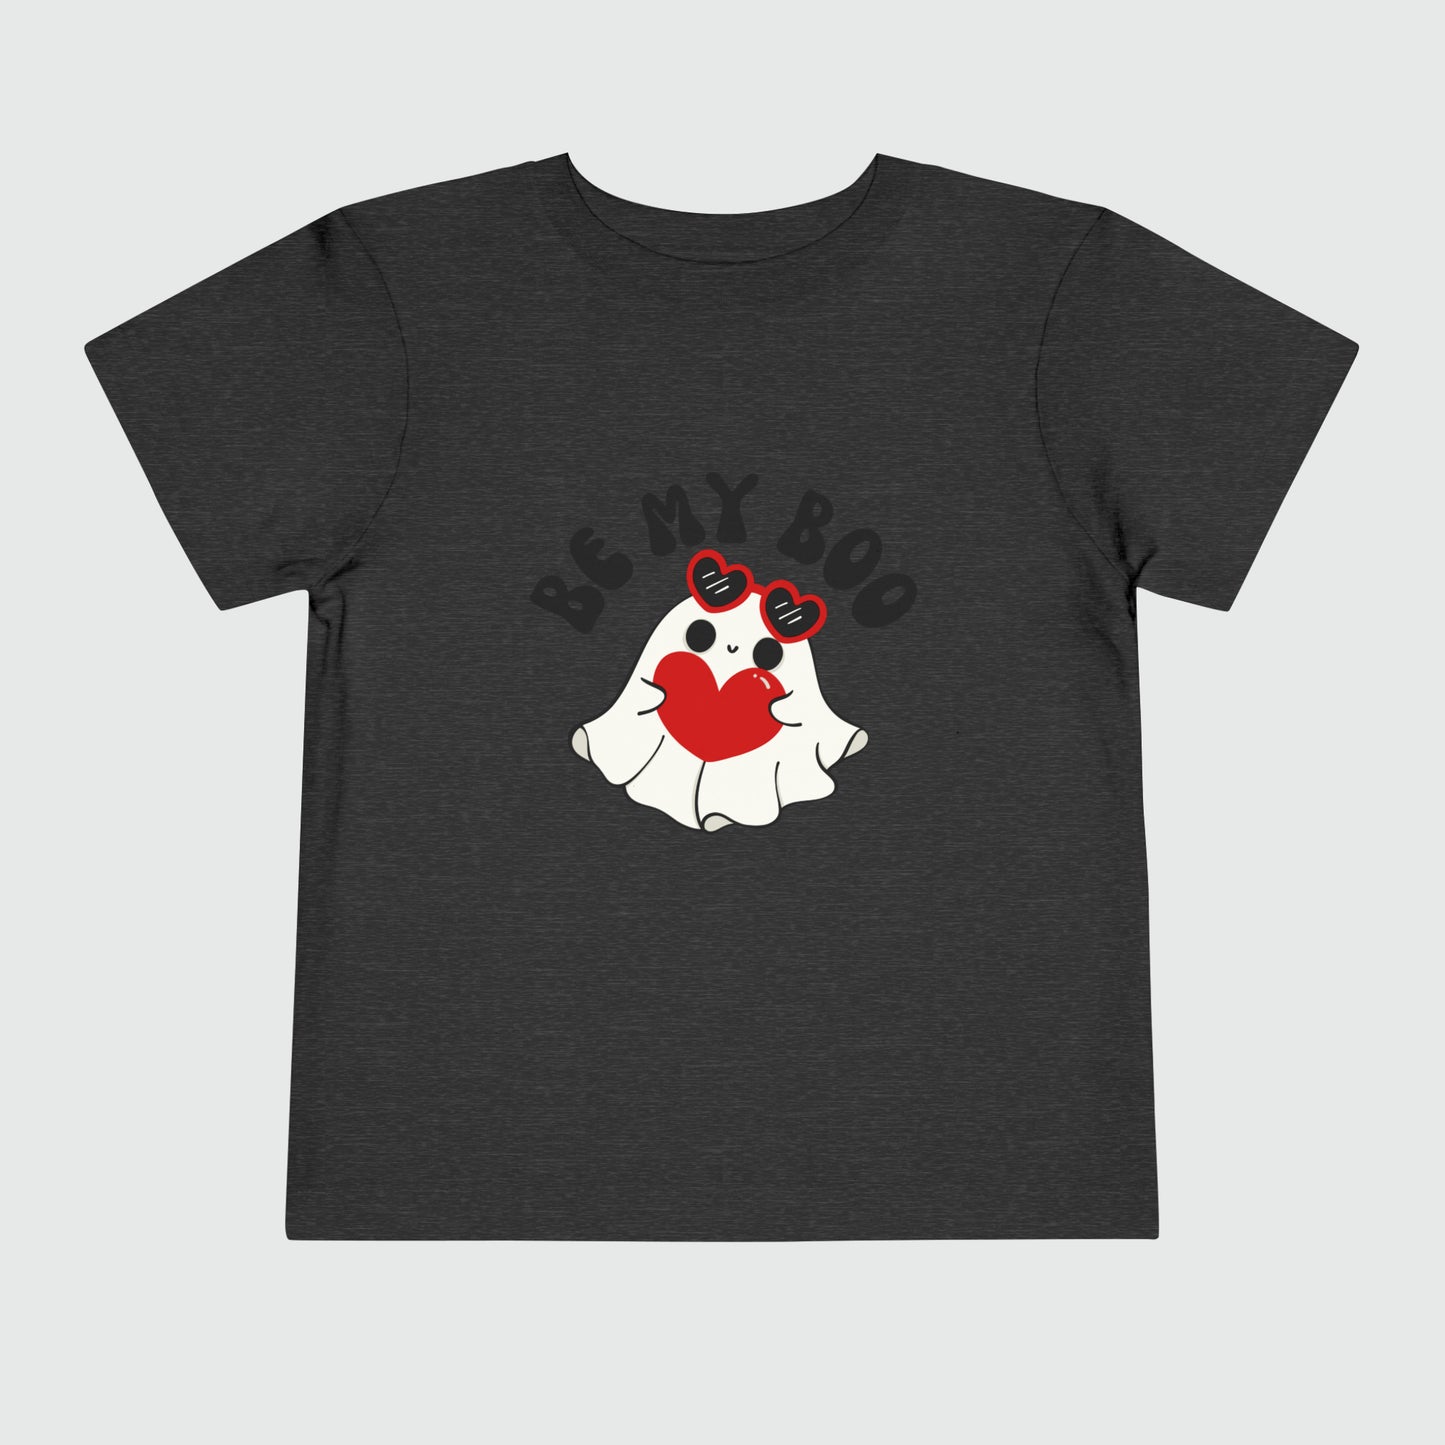 Be My Boo Toddler Tee